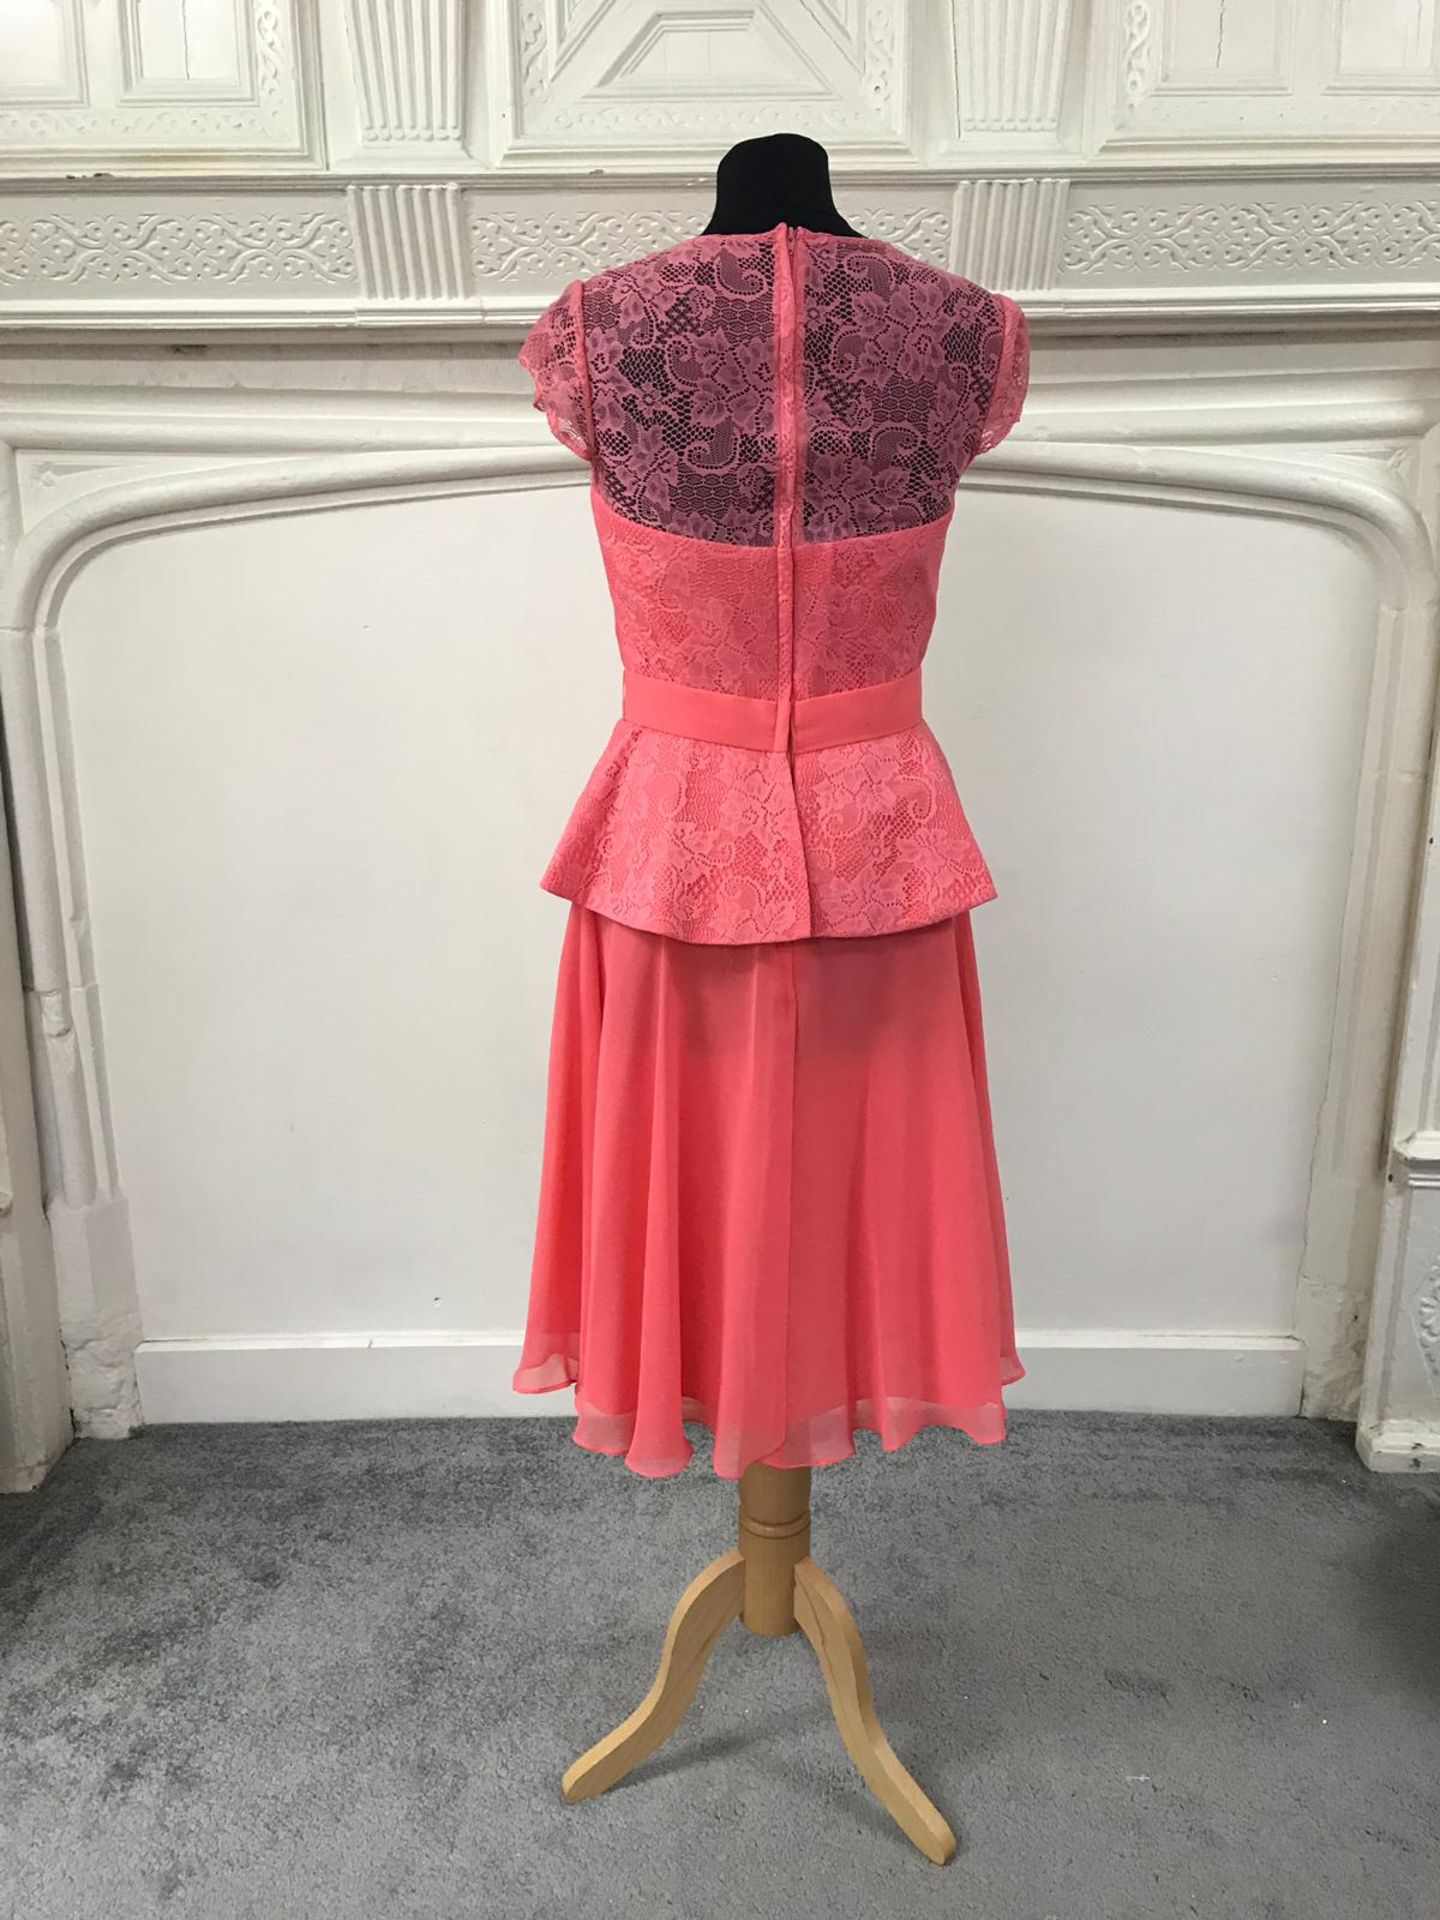 Short Coral Dress Size 6 Lace top - Image 4 of 4